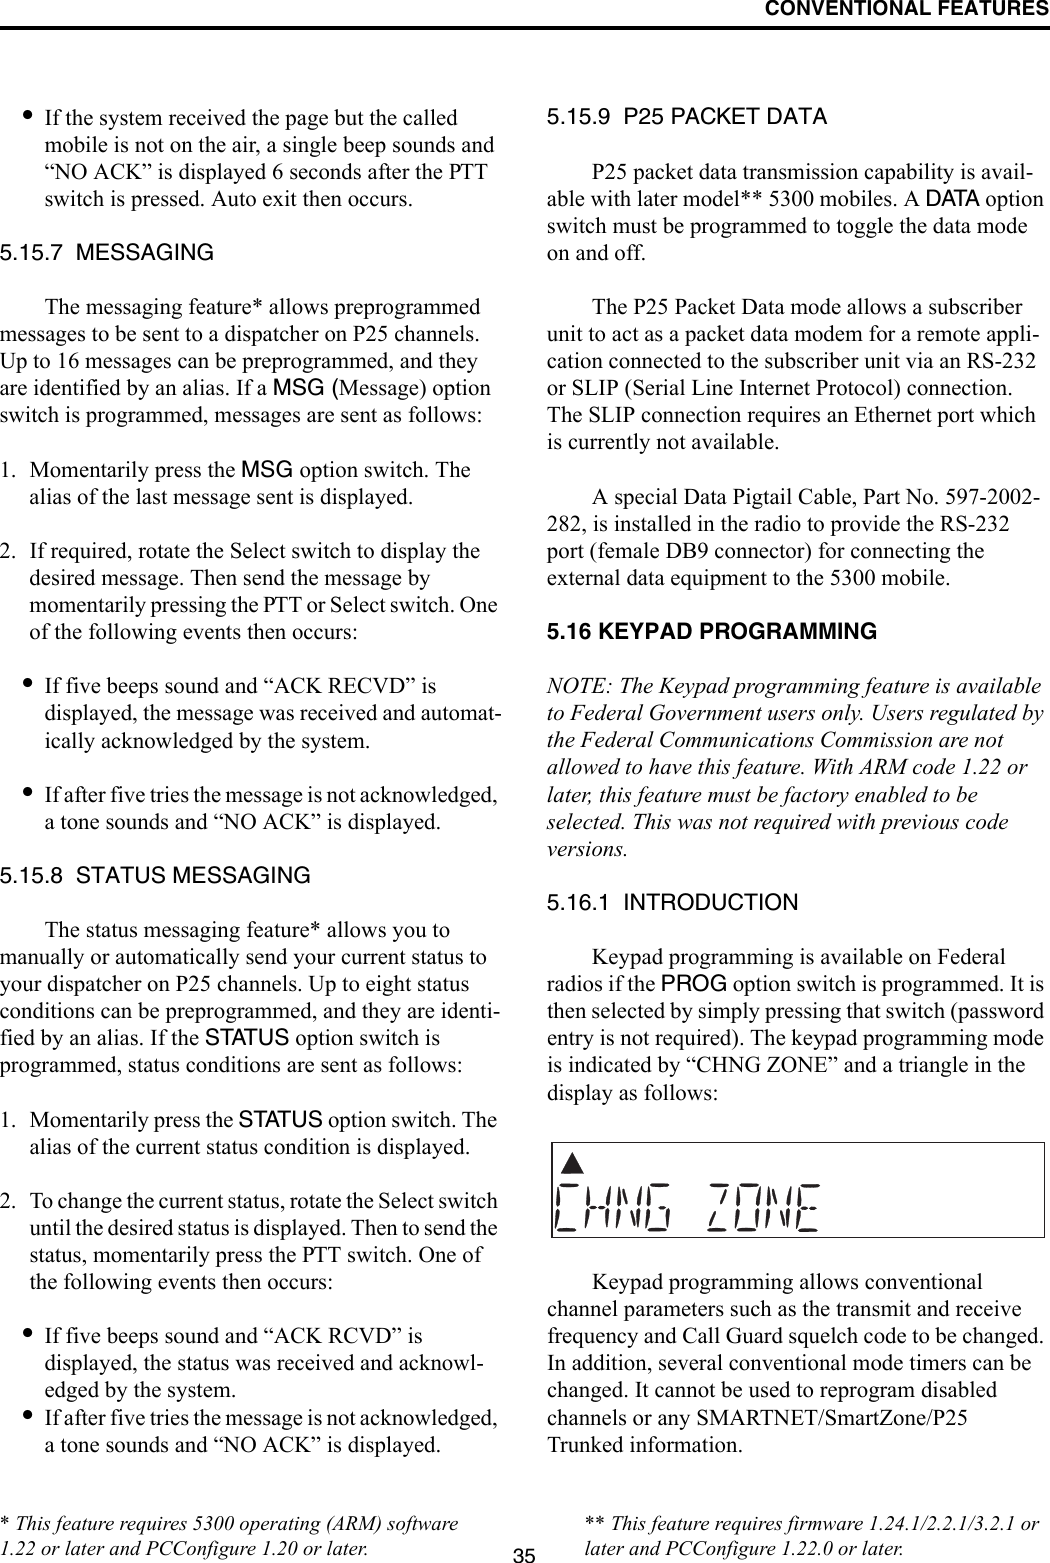 CONVENTIONAL FEATURES35•If the system received the page but the called mobile is not on the air, a single beep sounds and “NO ACK” is displayed 6 seconds after the PTT switch is pressed. Auto exit then occurs.5.15.7  MESSAGINGThe messaging feature* allows preprogrammed messages to be sent to a dispatcher on P25 channels. Up to 16 messages can be preprogrammed, and they are identified by an alias. If a MSG (Message) option switch is programmed, messages are sent as follows:1. Momentarily press the MSG option switch. The alias of the last message sent is displayed.2. If required, rotate the Select switch to display the desired message. Then send the message by momentarily pressing the PTT or Select switch. One of the following events then occurs:•If five beeps sound and “ACK RECVD” is displayed, the message was received and automat-ically acknowledged by the system.•If after five tries the message is not acknowledged, a tone sounds and “NO ACK” is displayed. 5.15.8  STATUS MESSAGINGThe status messaging feature* allows you to manually or automatically send your current status to your dispatcher on P25 channels. Up to eight status conditions can be preprogrammed, and they are identi-fied by an alias. If the STATUS option switch is programmed, status conditions are sent as follows:1. Momentarily press the STATUS option switch. The alias of the current status condition is displayed.2. To change the current status, rotate the Select switch until the desired status is displayed. Then to send the status, momentarily press the PTT switch. One of the following events then occurs:•If five beeps sound and “ACK RCVD” is displayed, the status was received and acknowl-edged by the system.•If after five tries the message is not acknowledged, a tone sounds and “NO ACK” is displayed. 5.15.9  P25 PACKET DATAP25 packet data transmission capability is avail-able with later model** 5300 mobiles. A DATA option switch must be programmed to toggle the data mode on and off. The P25 Packet Data mode allows a subscriber unit to act as a packet data modem for a remote appli-cation connected to the subscriber unit via an RS-232 or SLIP (Serial Line Internet Protocol) connection. The SLIP connection requires an Ethernet port which is currently not available.A special Data Pigtail Cable, Part No. 597-2002-282, is installed in the radio to provide the RS-232 port (female DB9 connector) for connecting the external data equipment to the 5300 mobile. 5.16 KEYPAD PROGRAMMINGNOTE: The Keypad programming feature is available to Federal Government users only. Users regulated by the Federal Communications Commission are not allowed to have this feature. With ARM code 1.22 or later, this feature must be factory enabled to be selected. This was not required with previous code versions.5.16.1  INTRODUCTIONKeypad programming is available on Federal radios if the PROG option switch is programmed. It is then selected by simply pressing that switch (password entry is not required). The keypad programming mode is indicated by “CHNG ZONE” and a triangle in the display as follows:Keypad programming allows conventional channel parameters such as the transmit and receive frequency and Call Guard squelch code to be changed. In addition, several conventional mode timers can be changed. It cannot be used to reprogram disabled channels or any SMARTNET/SmartZone/P25 Trunked information.* This feature requires 5300 operating (ARM) software 1.22 or later and PCConfigure 1.20 or later.** This feature requires firmware 1.24.1/2.2.1/3.2.1 or later and PCConfigure 1.22.0 or later.